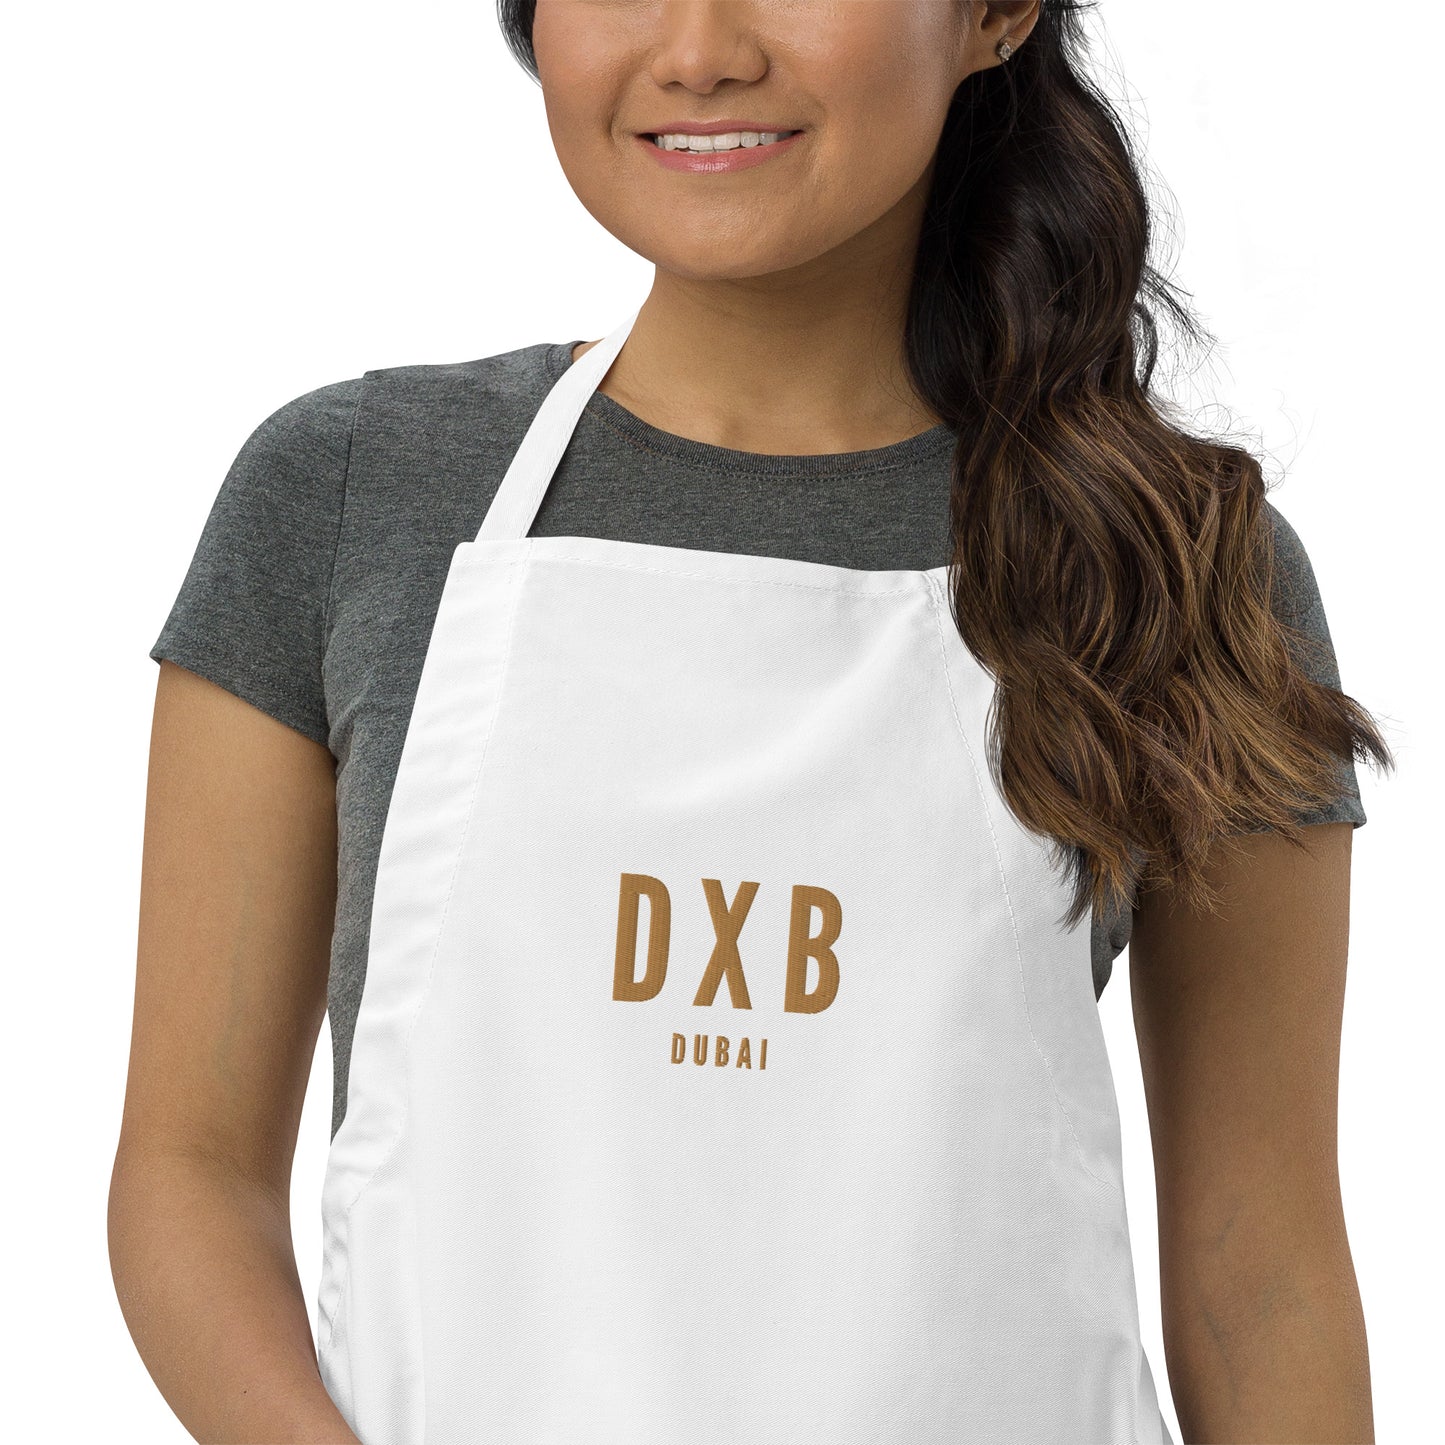 City Embroidered Apron - Old Gold • DXB Dubai • YHM Designs - Image 04